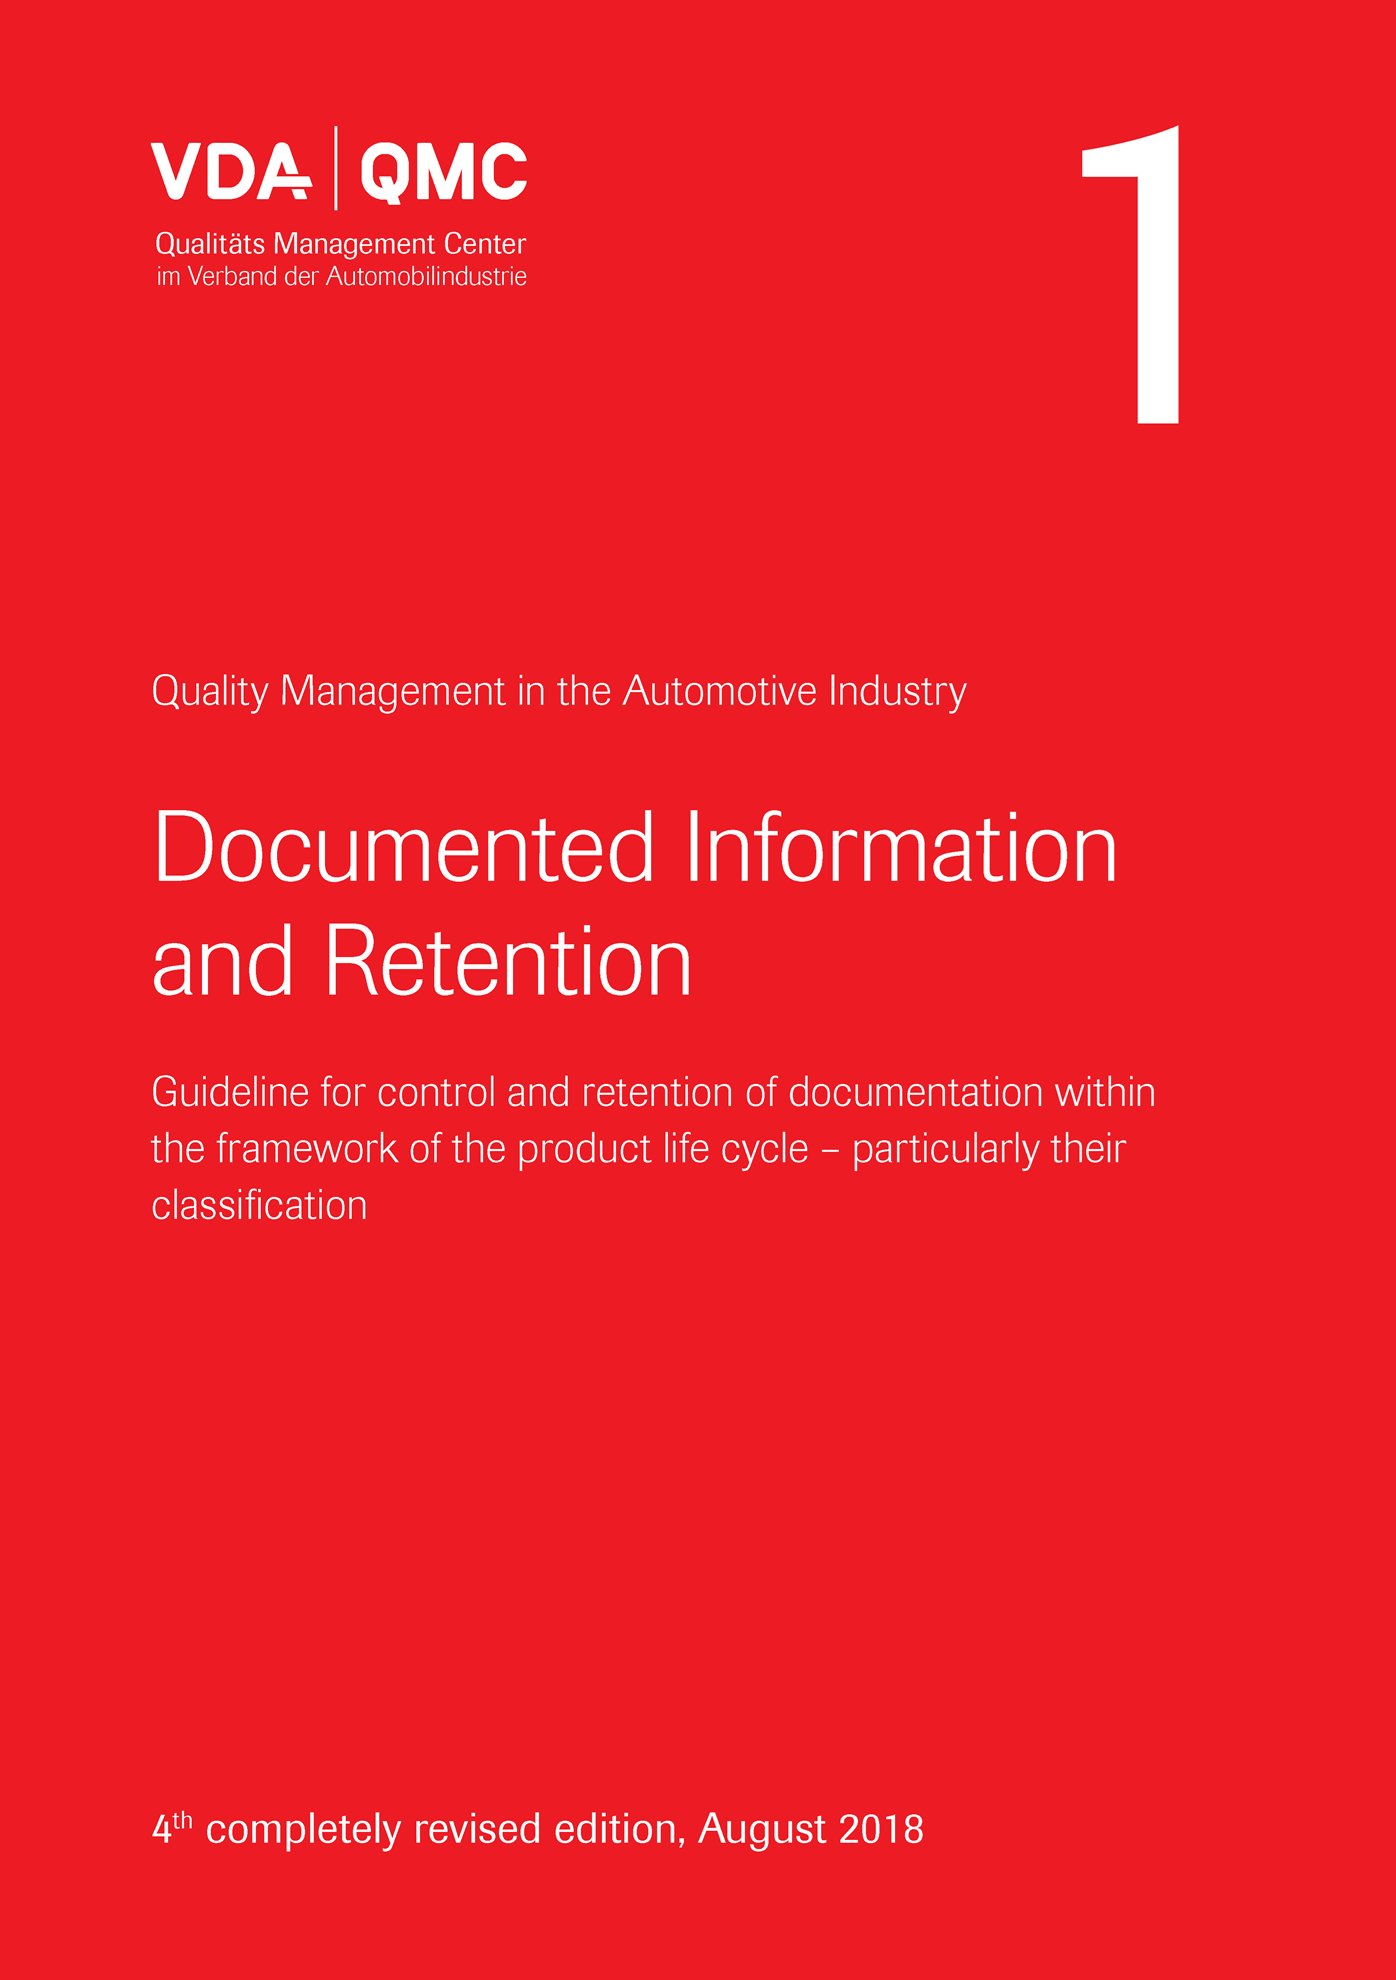 Publikation  VDA Volume 1 - Documented Information and Retention, 4th completely revised edition, August 2018 1.8.2018 Ansicht